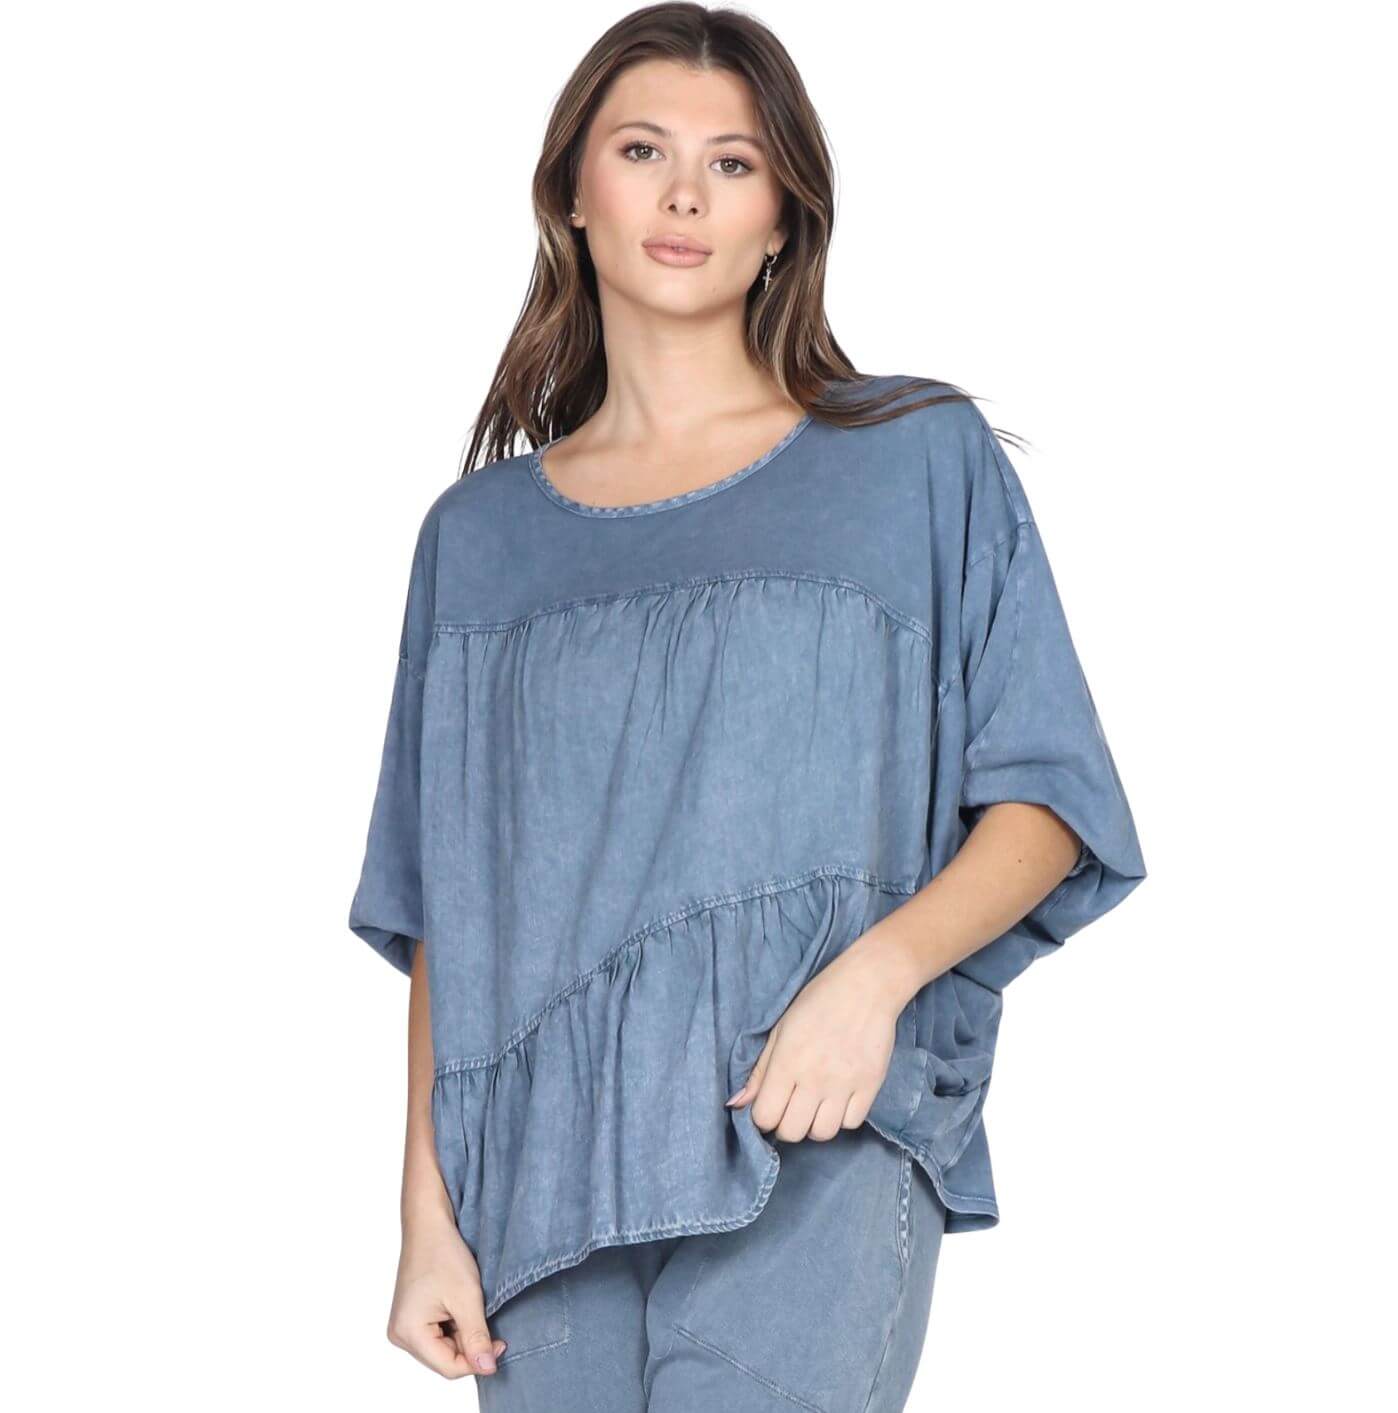 M. Rena Mineral Washed Oversized Linen Top with Pleating in Front | Style# S5000A | Made in USA | Natural Linen & Cotton Fabric | Ladies Made In America Clothing | Color: Denim Blue